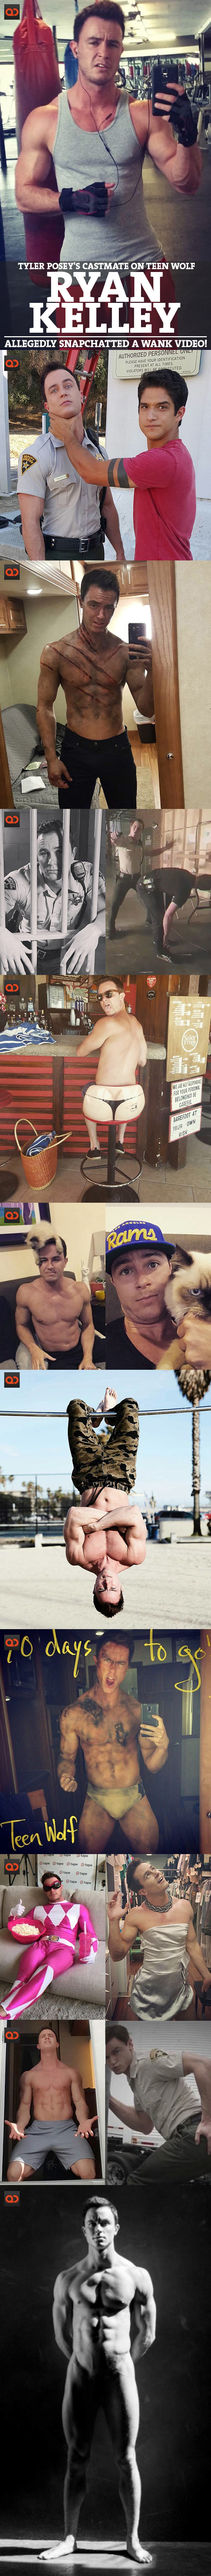 Ryan Kelley, Tyler Posey's Castmate On Teen Wolf, Allegedly Snapchatted A Wank Video!